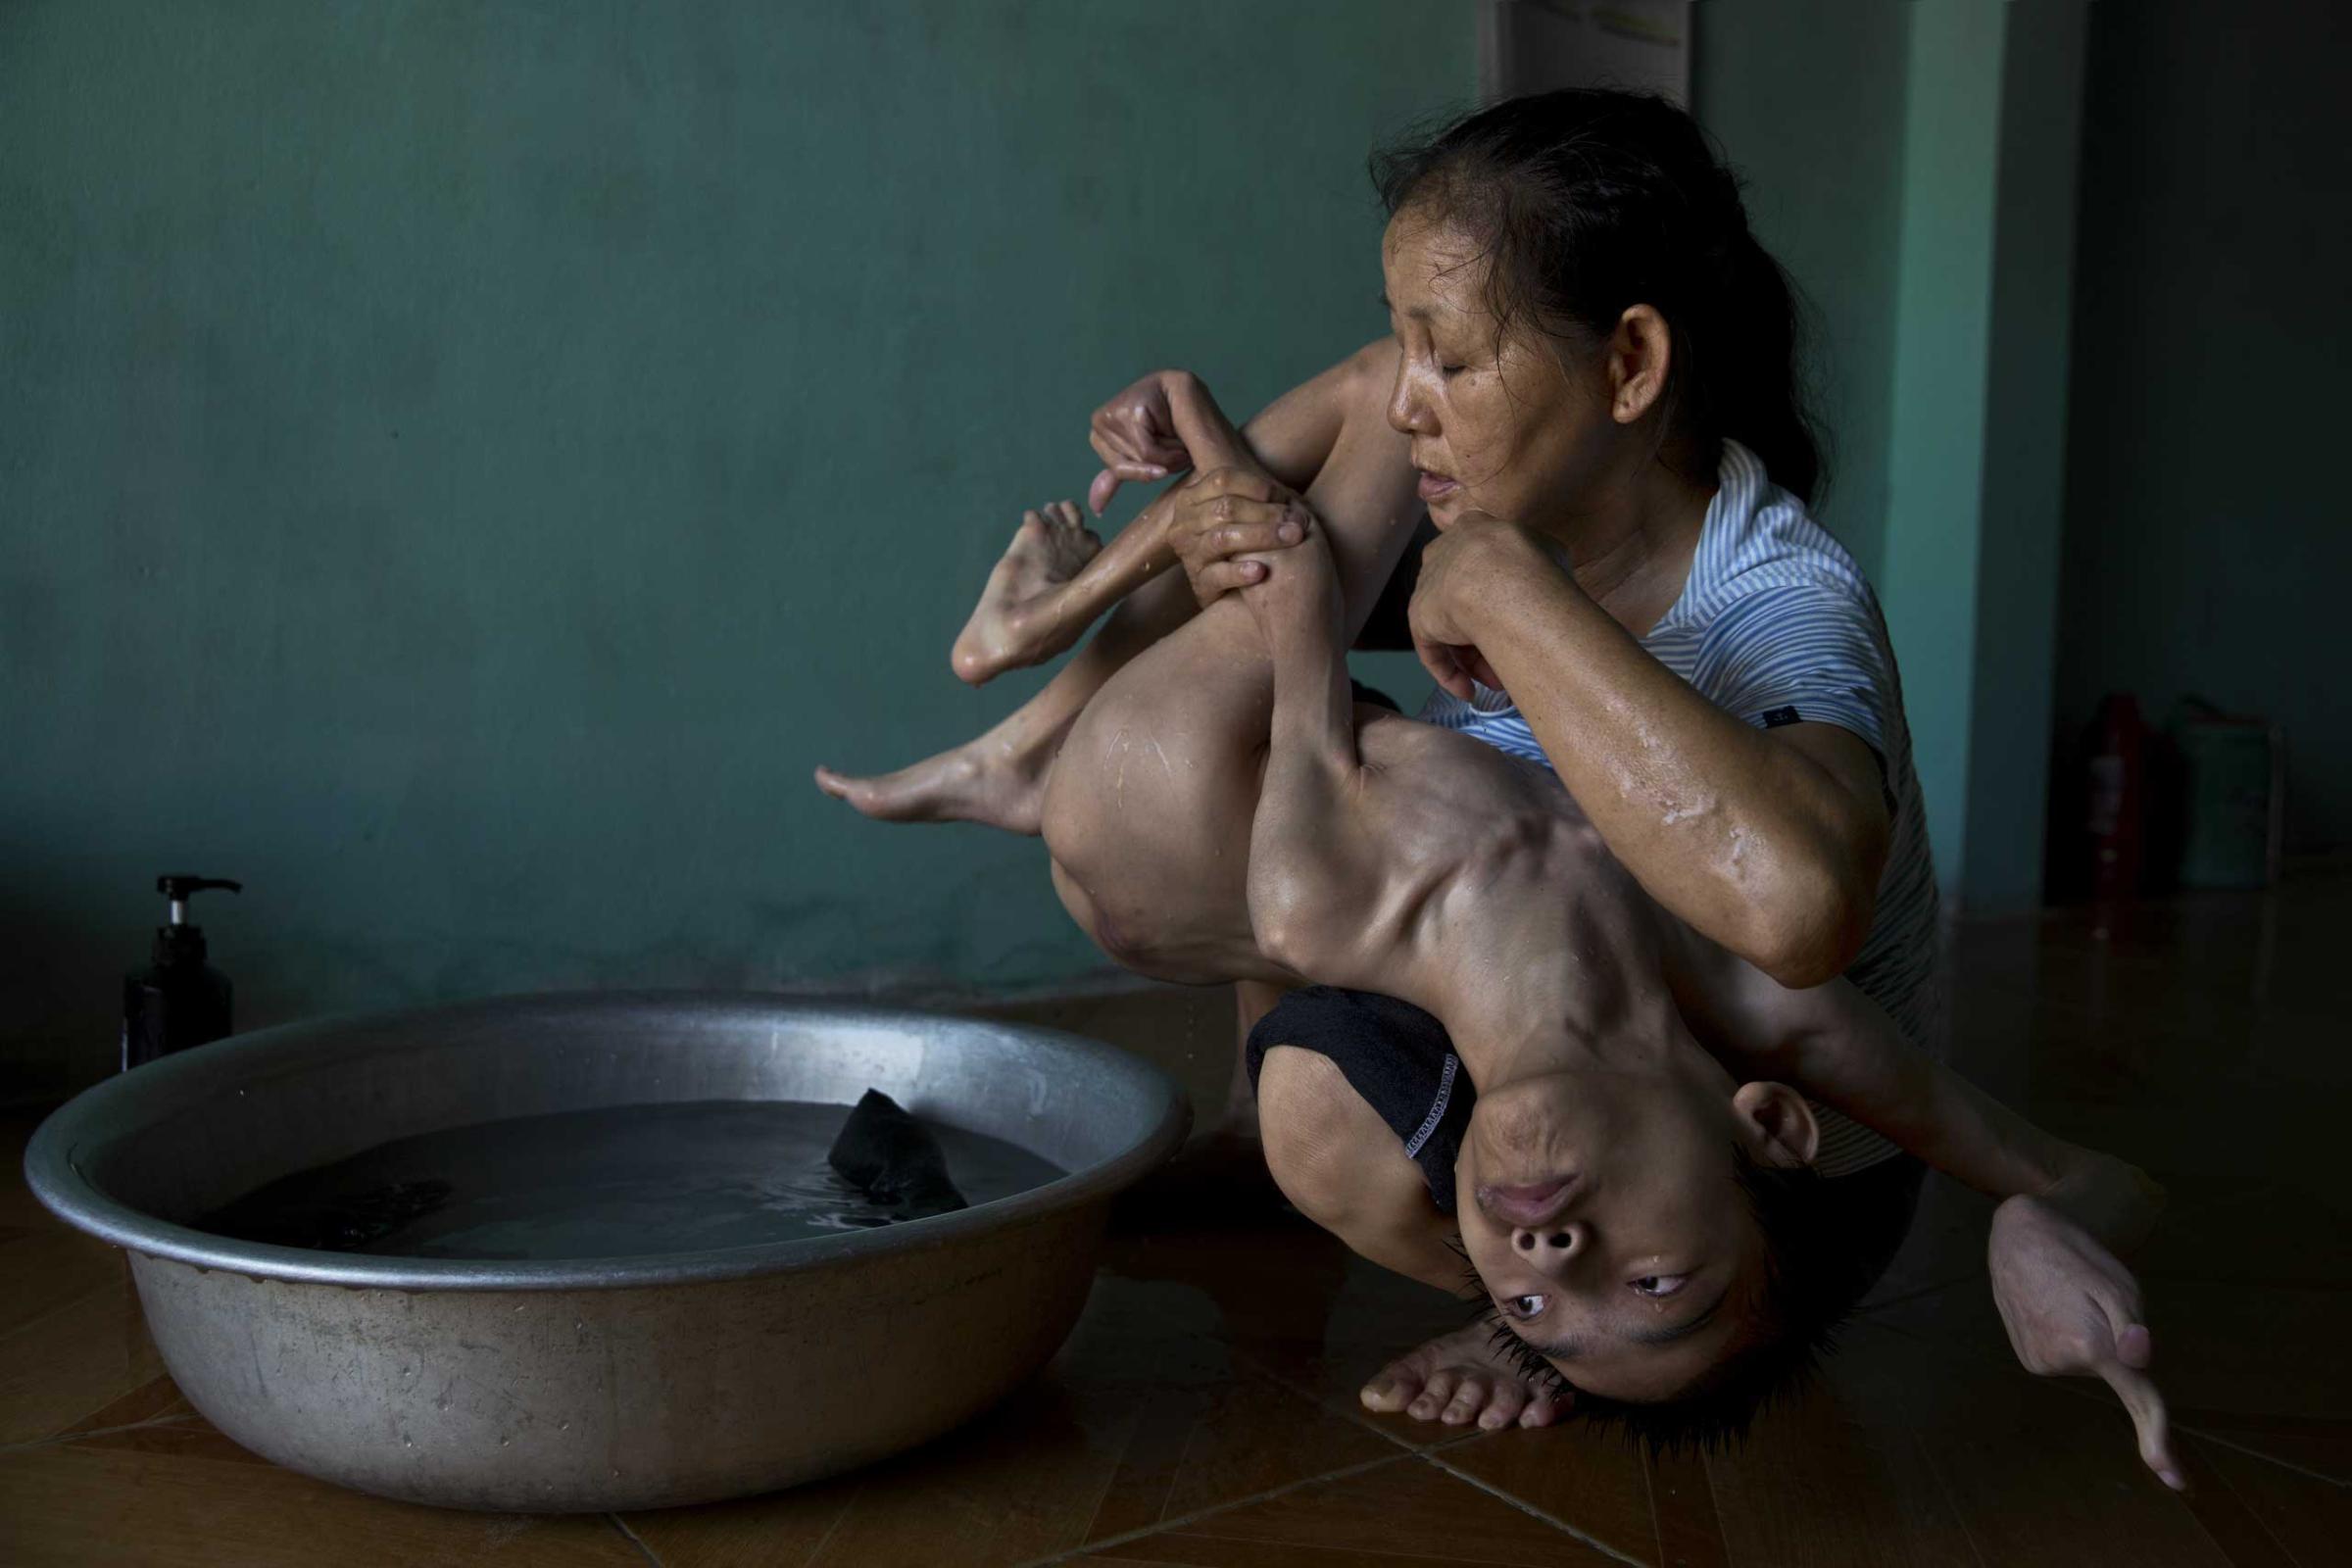 Tran Thien Nhan, with severely malformed head and diminutive body, is an Agent Orange victim in Danang, Vietnam. His mother, Ngo Thi Tinh, and grandmother, The Thi Dao, care for him.